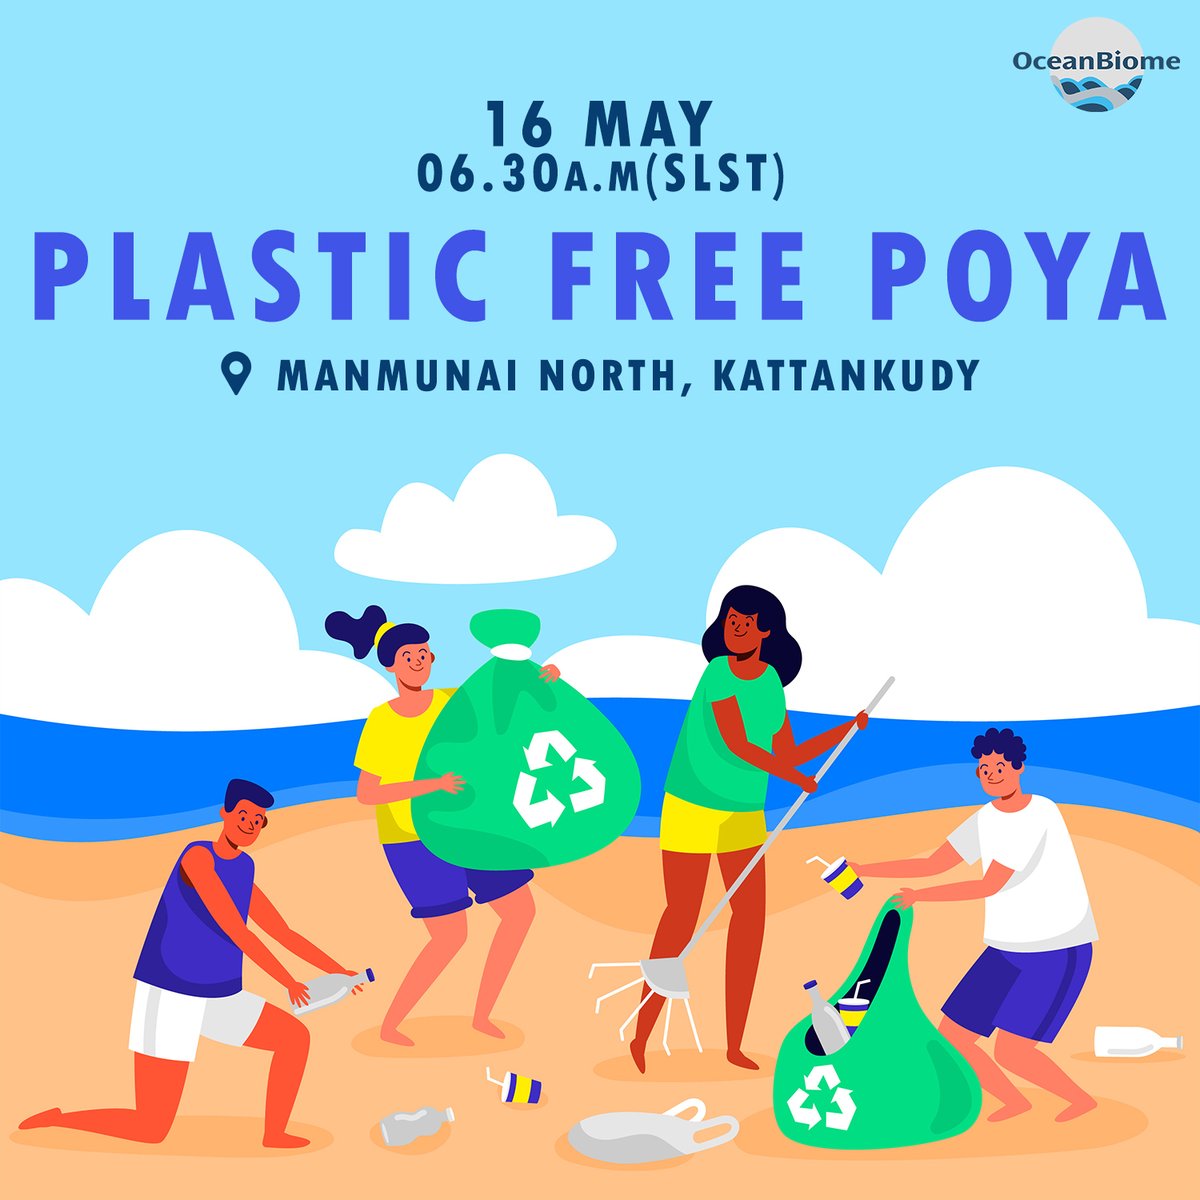 📍 We're going to clean the coastline of the Manmunai North divisional secretariat area and the Kattankudy divisional secretariat area on the 16th of May 2022 with the collaboration of youth clubs.
♻️  Plastic Free Poya 
#OceanBiome #beachcleanup #PFP #recycle #climatechange